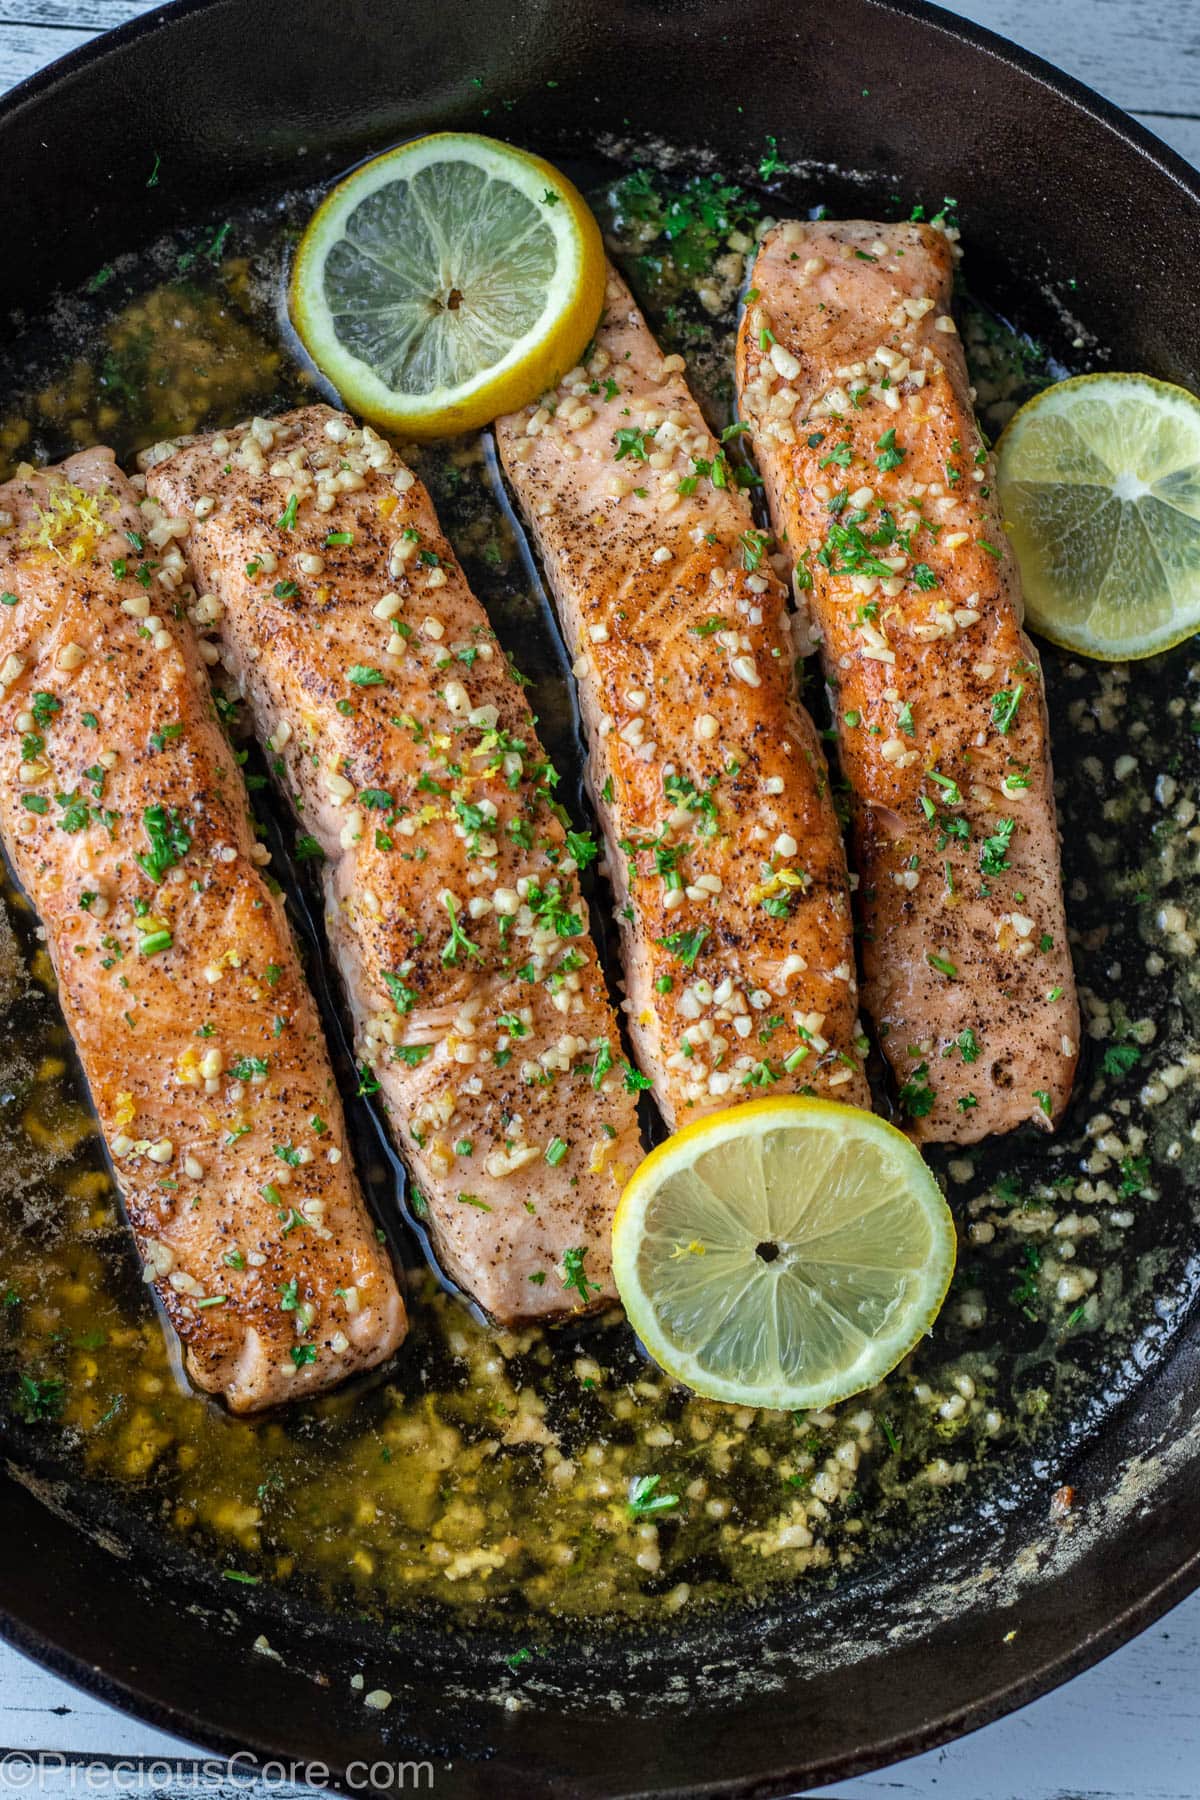 4 pieces of salmon in a cast iron skillet.